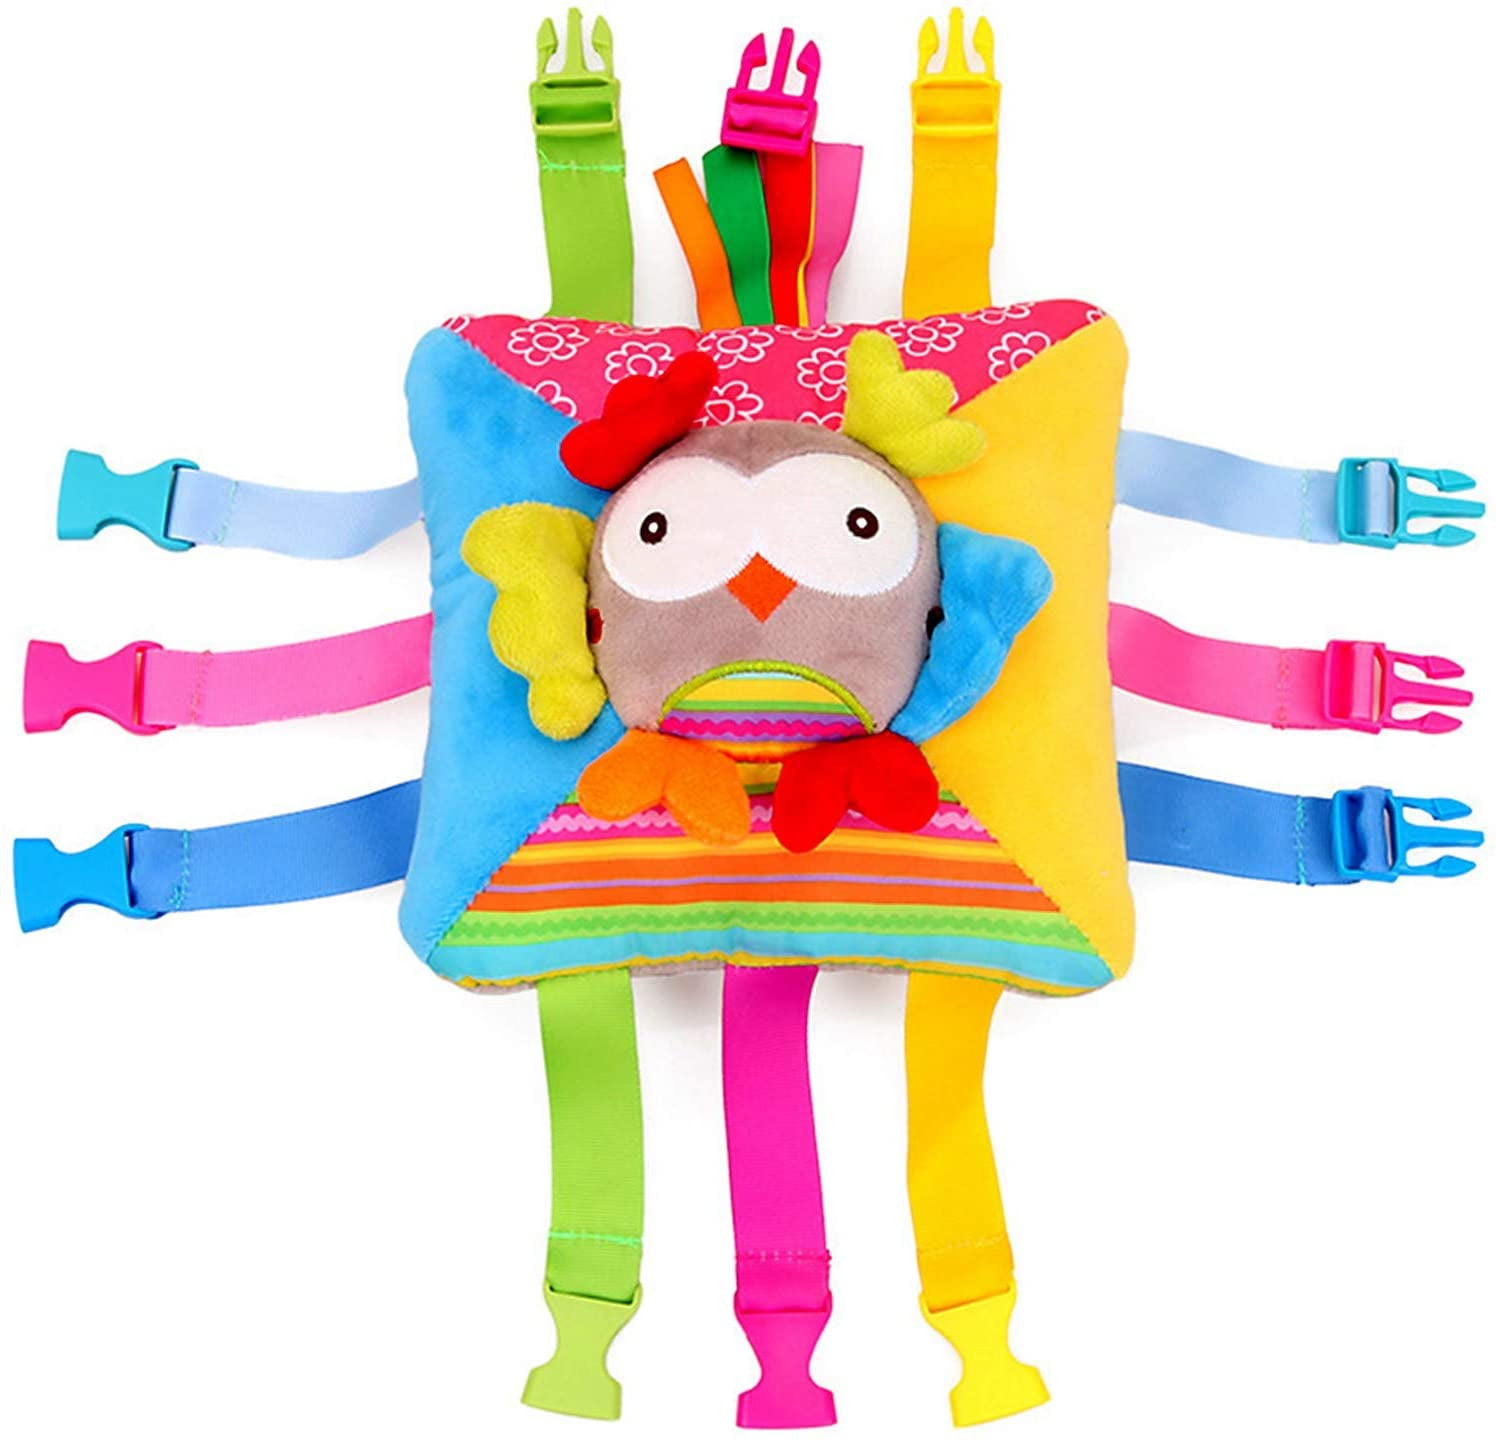 Sensory Buckle Pillow Early Learning Toy with Buckles to Develop Motor Skills 